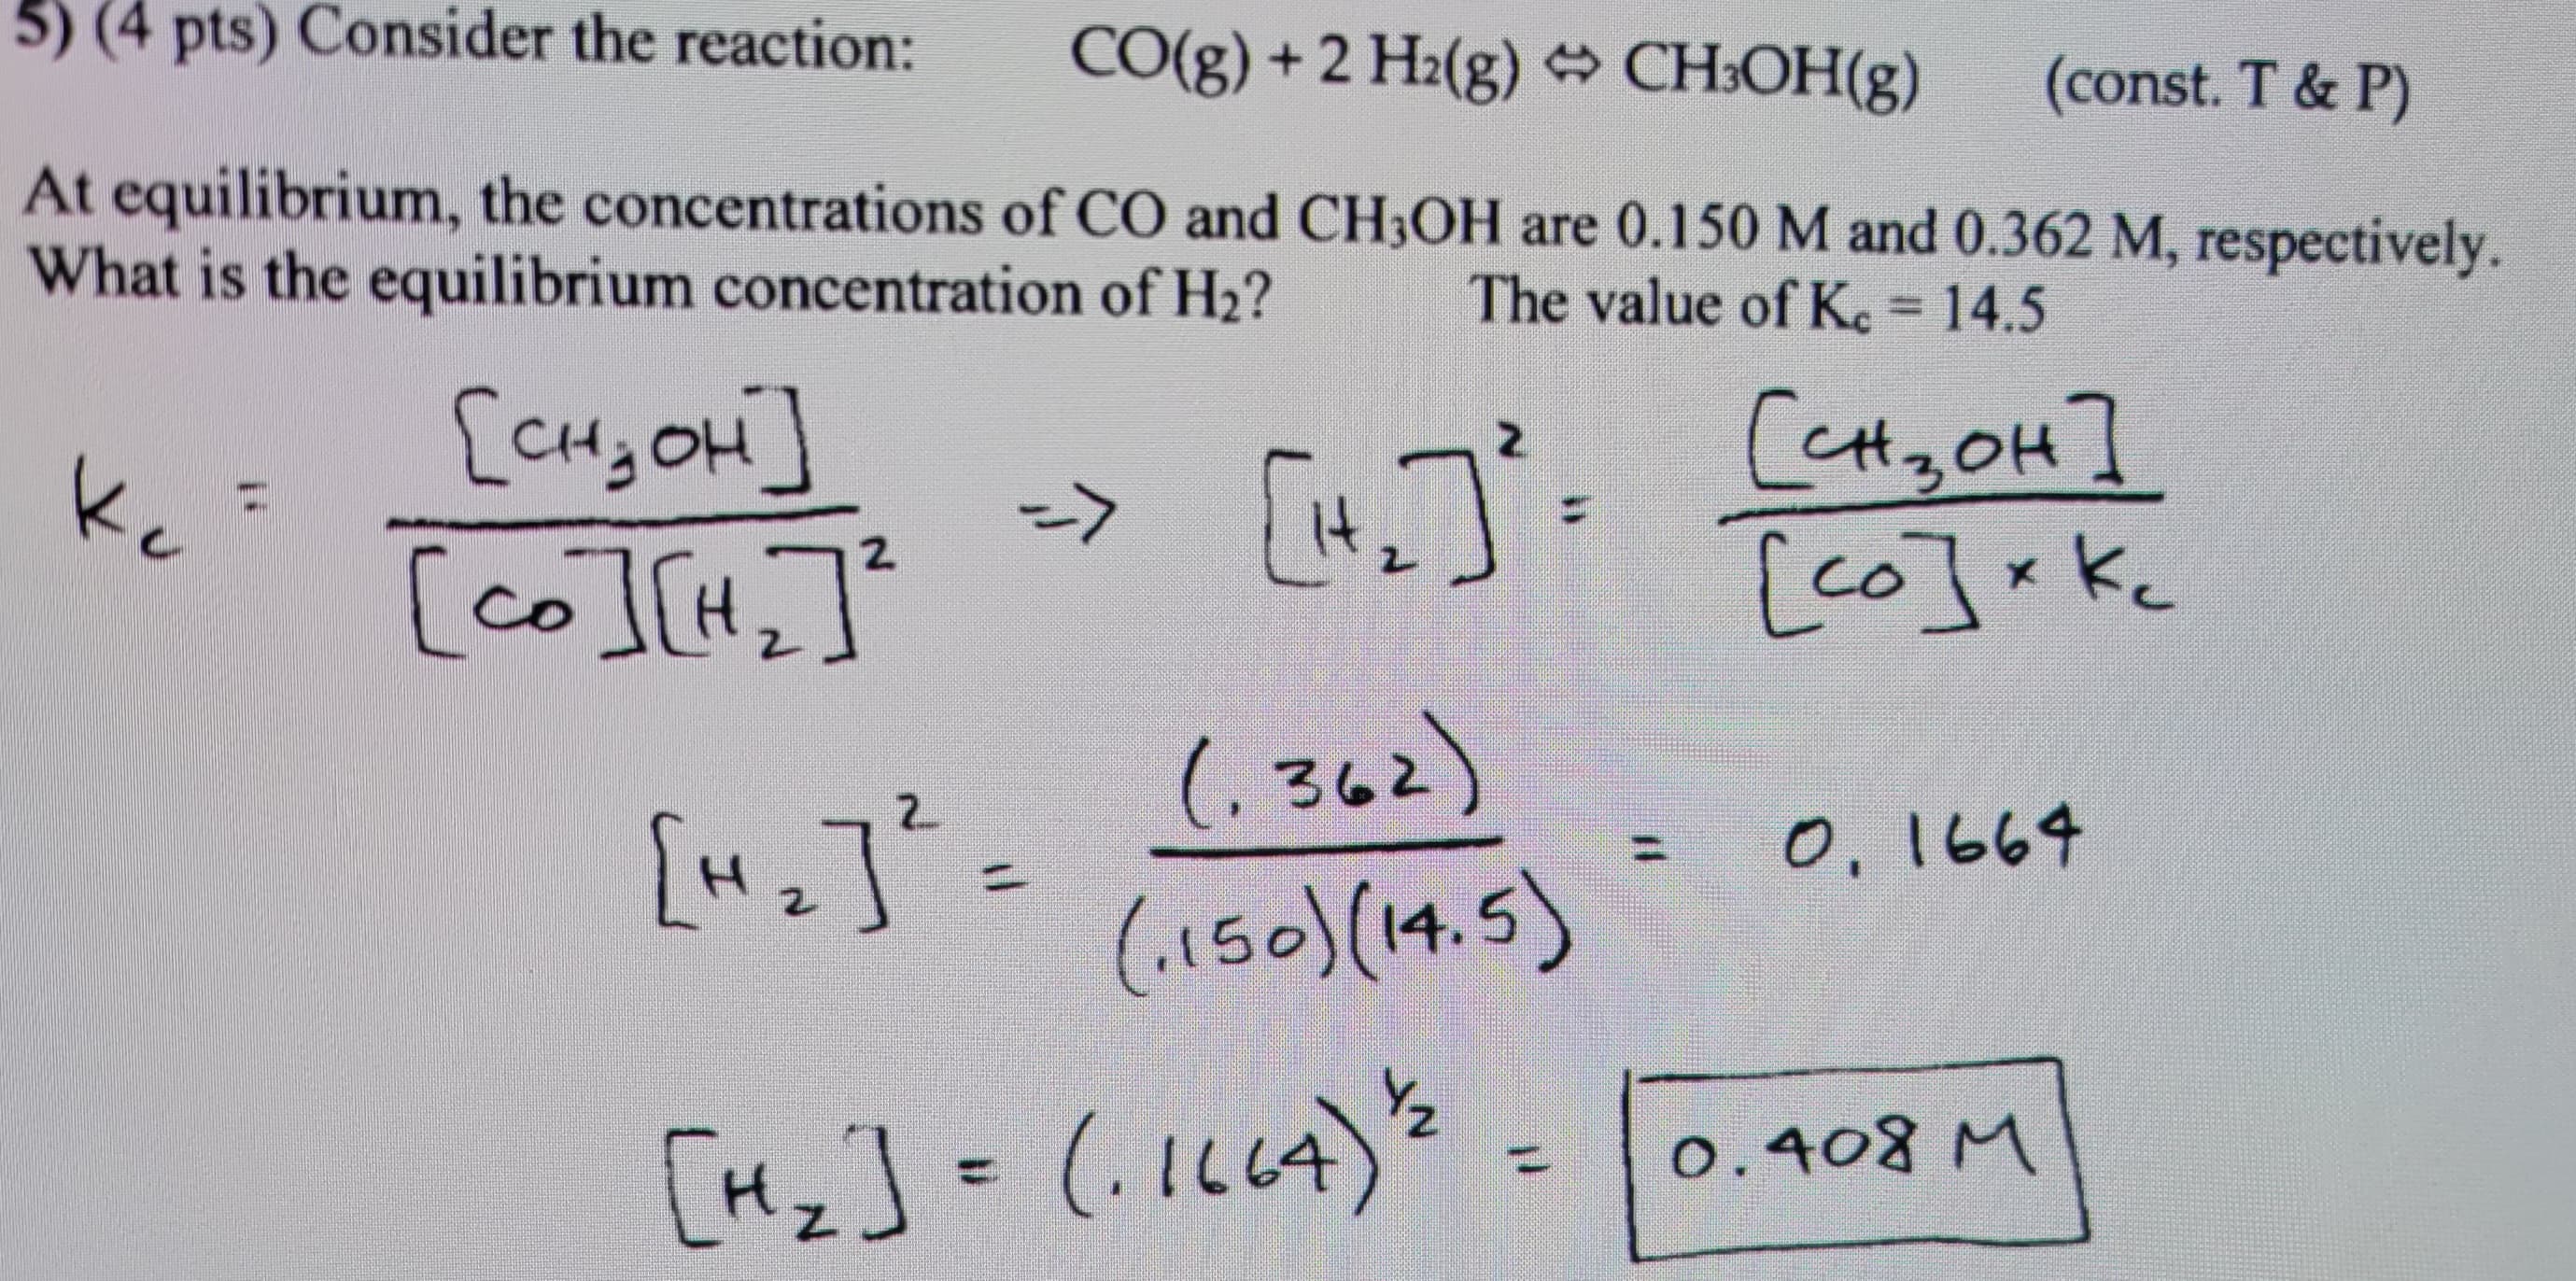 5) (4 pts) Consider the reaction:
CO(g) + 2 H₂(g) + CH³OH(g)
(const. T & P)
At equilibrium, the concentrations of CO and CH3OH are 0.150 M and 0.362 M, respectively.
What is the equilibrium concentration of H₂?
The value of Kc = 14.5
Кс
[it
(362)
(1150) (14.5)
[CH₂OH]
(co ICH
2
=>
["₁₂] ² =
[H₂] = (-1664) 2
Сензон]
[co] xkc
Кс
0, 1664
0.408 M